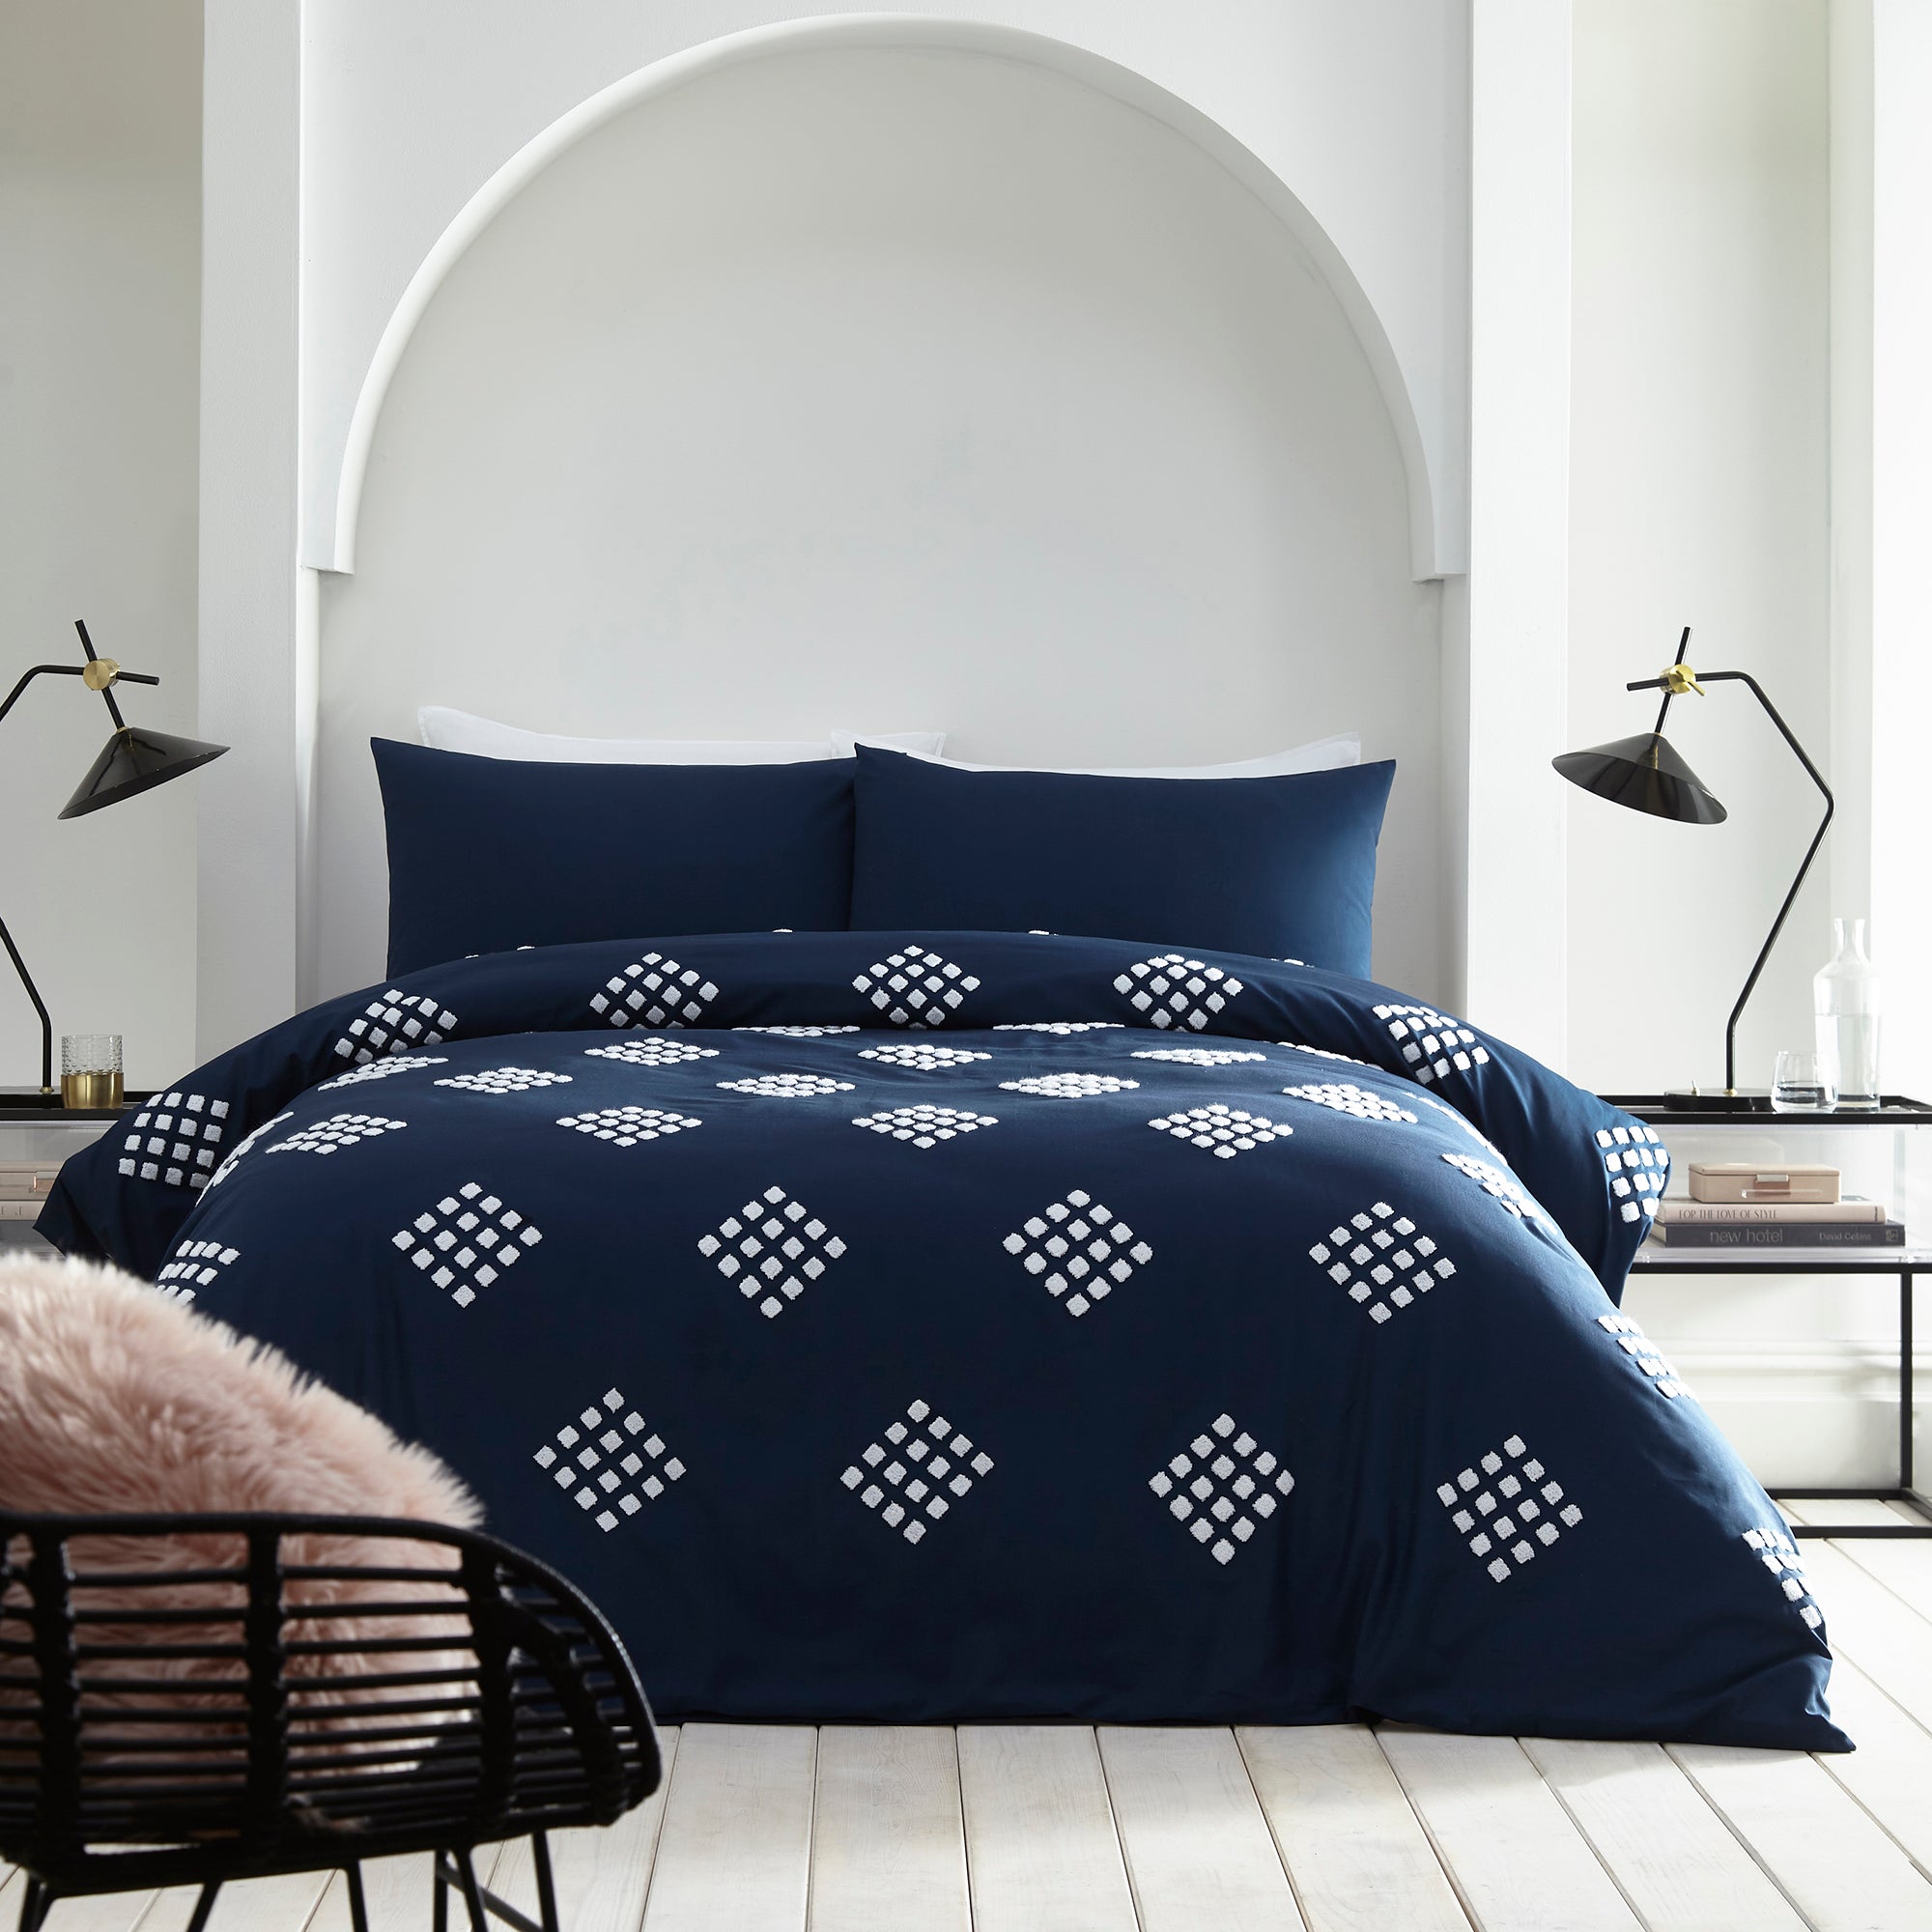 Diamond Tuft - 100% Cotton Duvet Cover Set in Navy - by Appletree Boutique